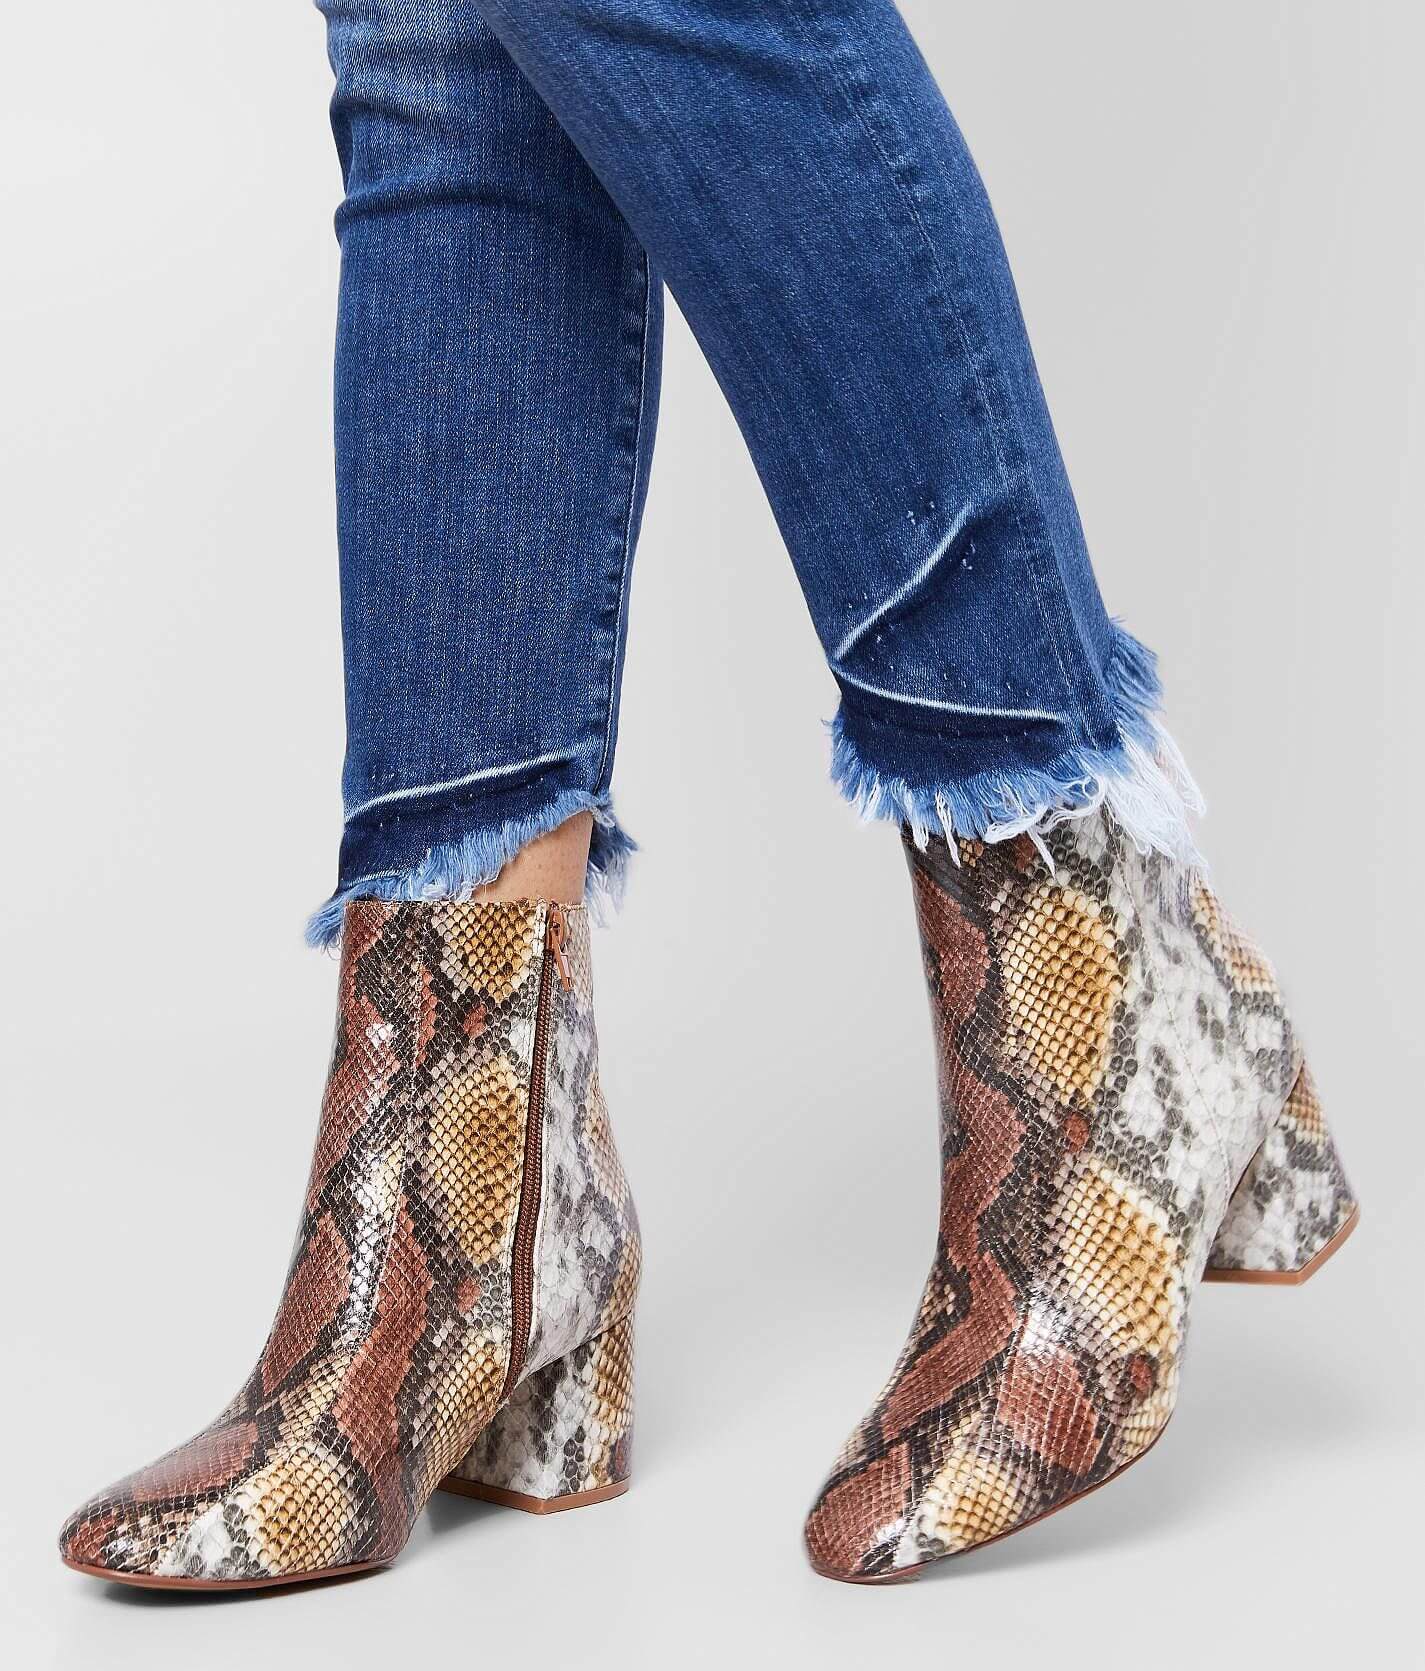 Chinese Laundry Davinna Faux Snakeskin Ankle Boot - Women's in Yellow Brown Snake | Buckle